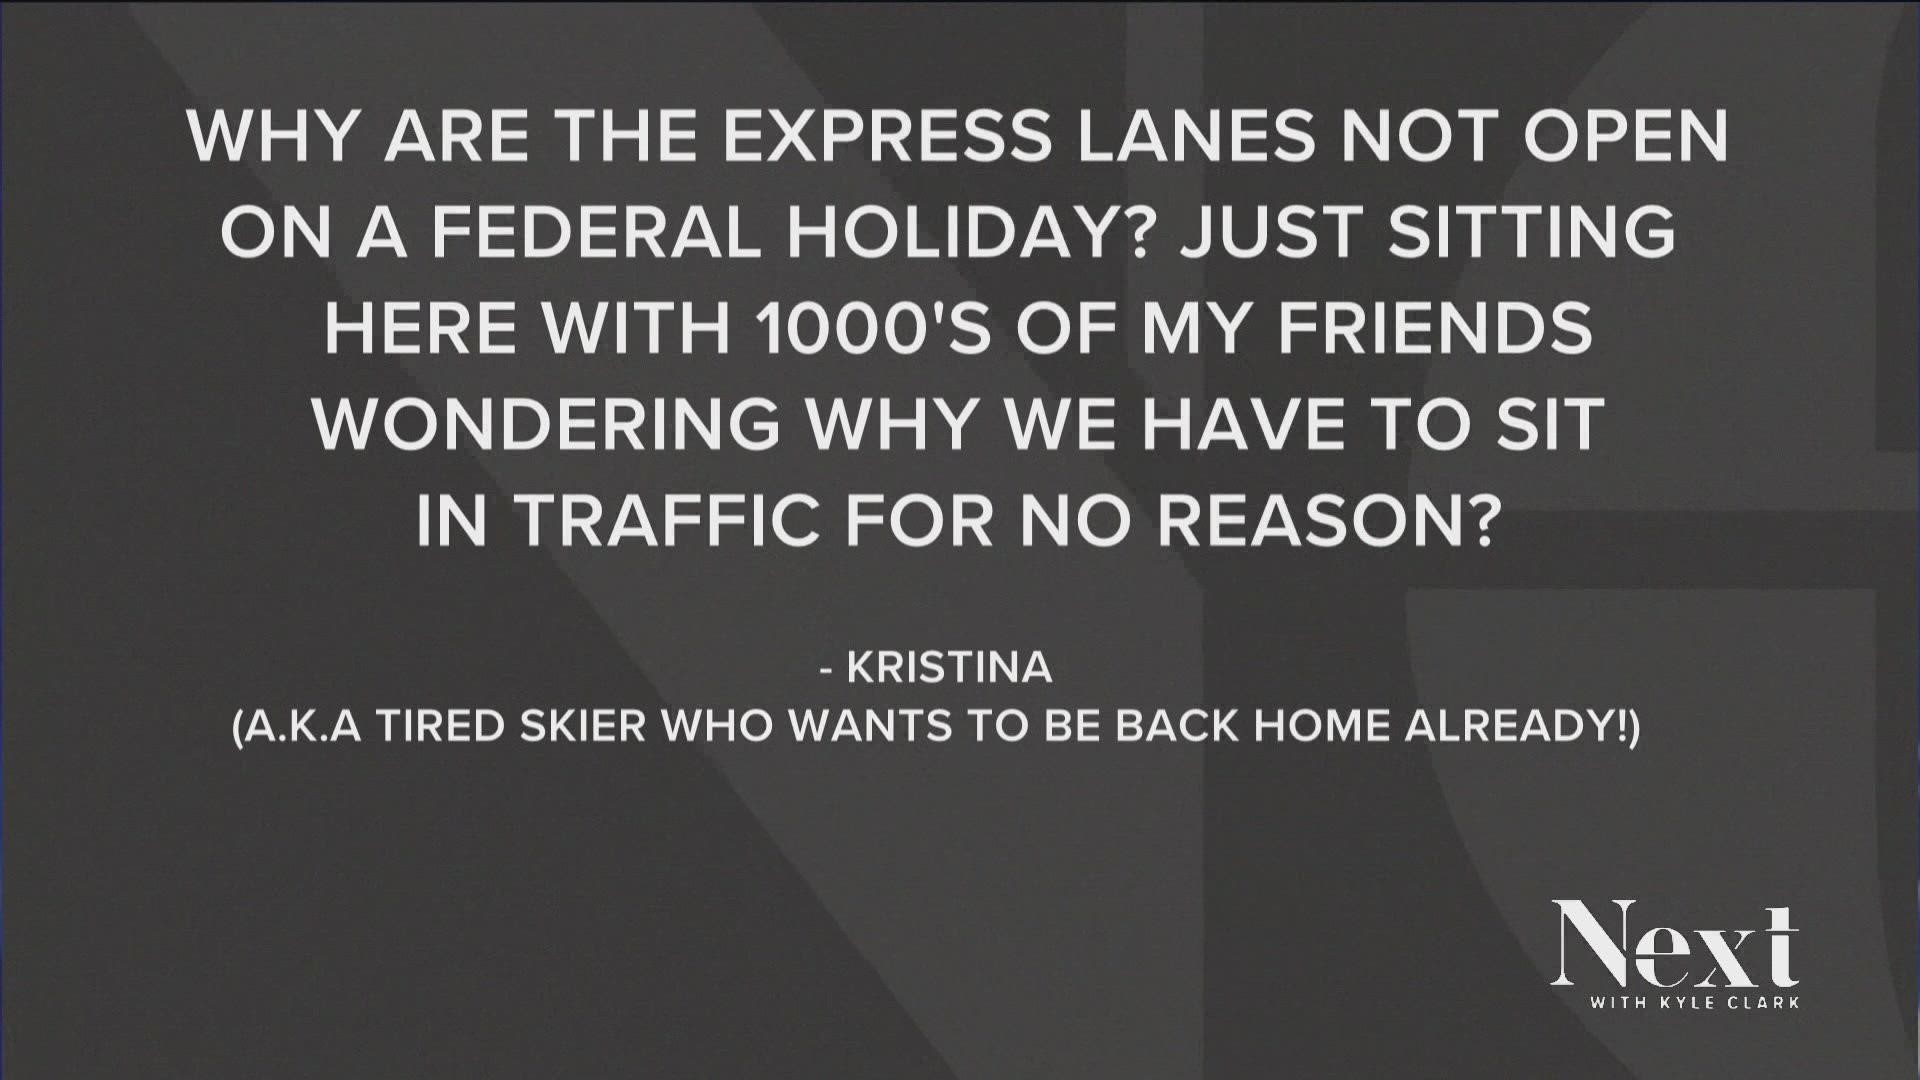 The express lanes don't meet federal standards for full time lanes - they're too narrow - so CDOT can only open them 100 days a year.